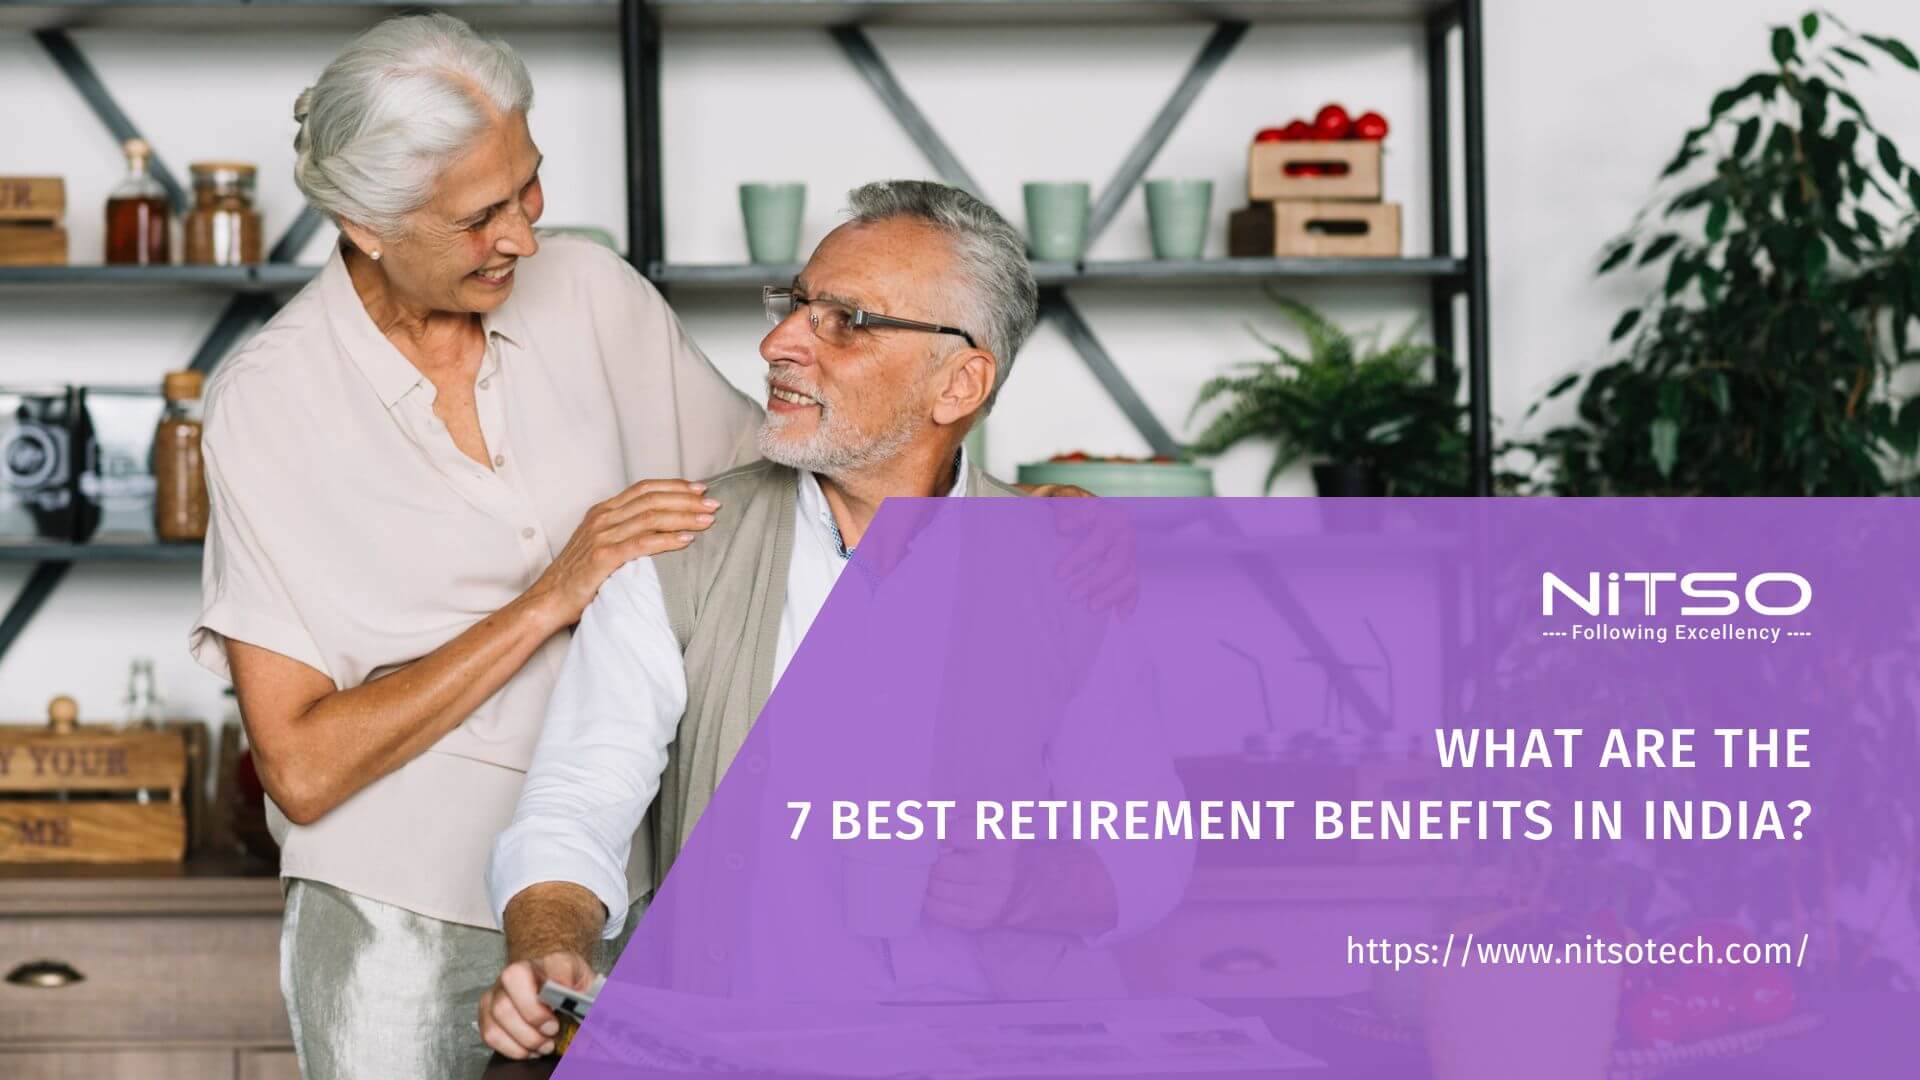 How to Secure Your Retirement Benefits in India?